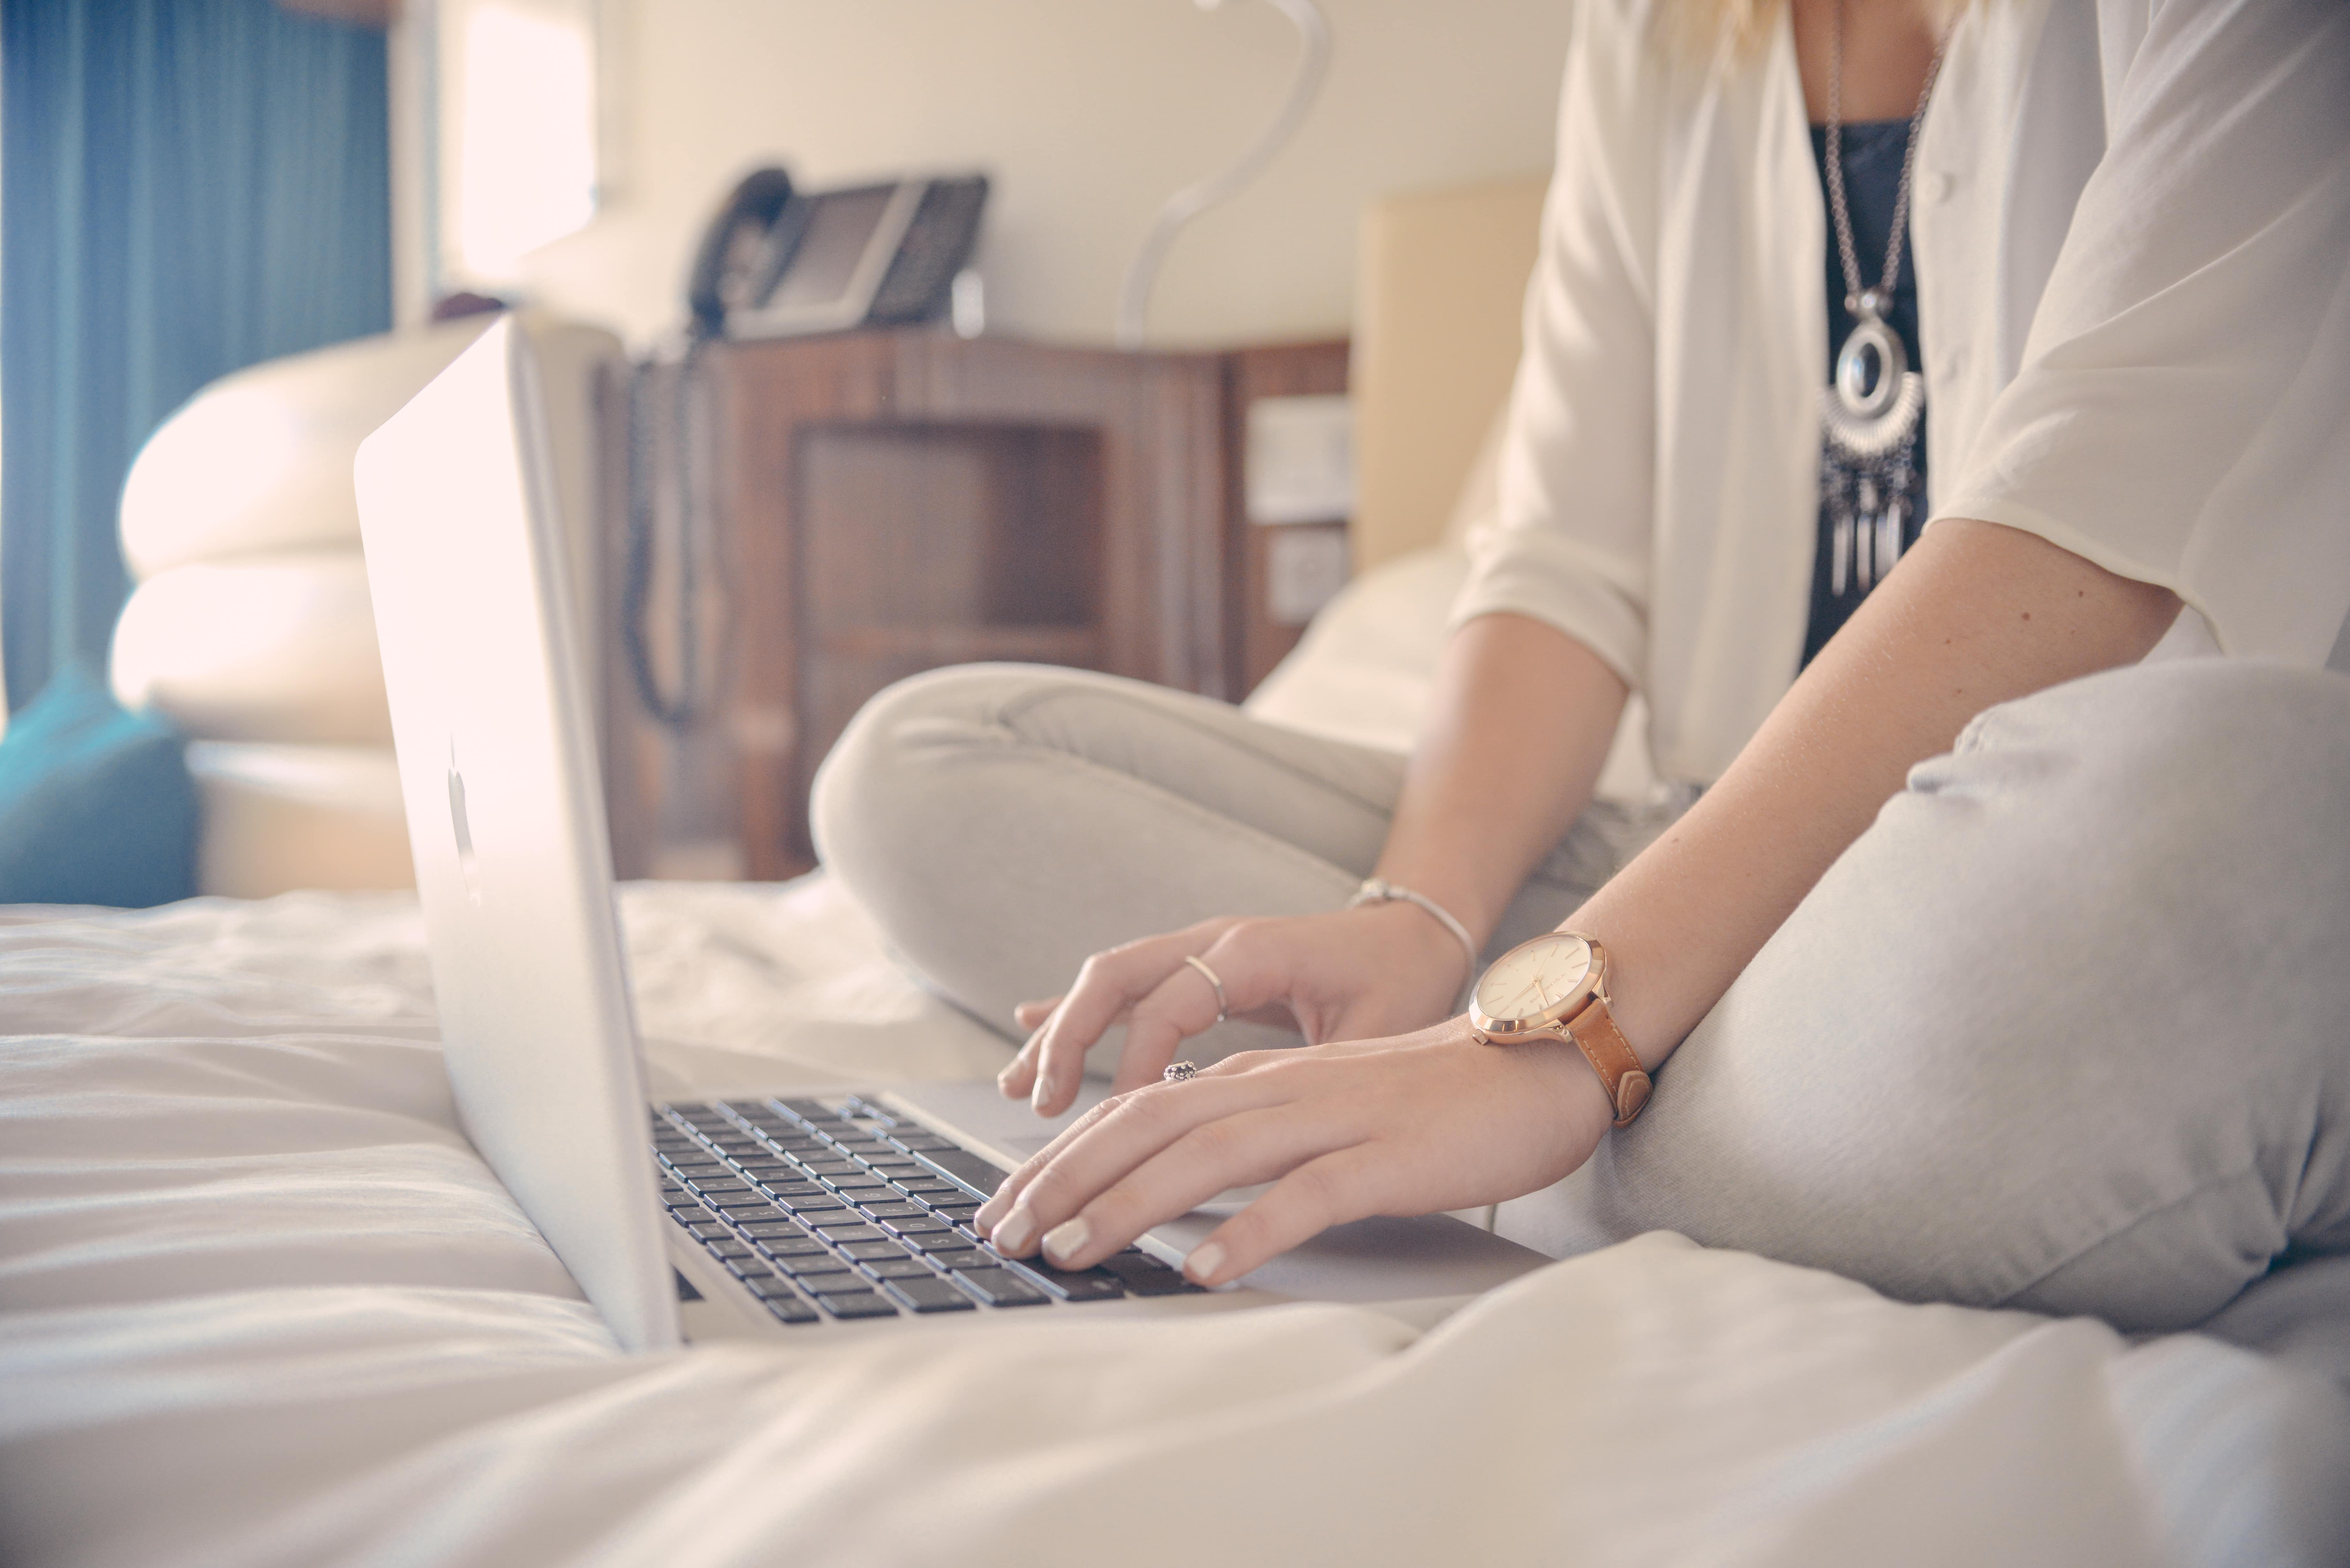 Woman sitting on a bed working on her laptop